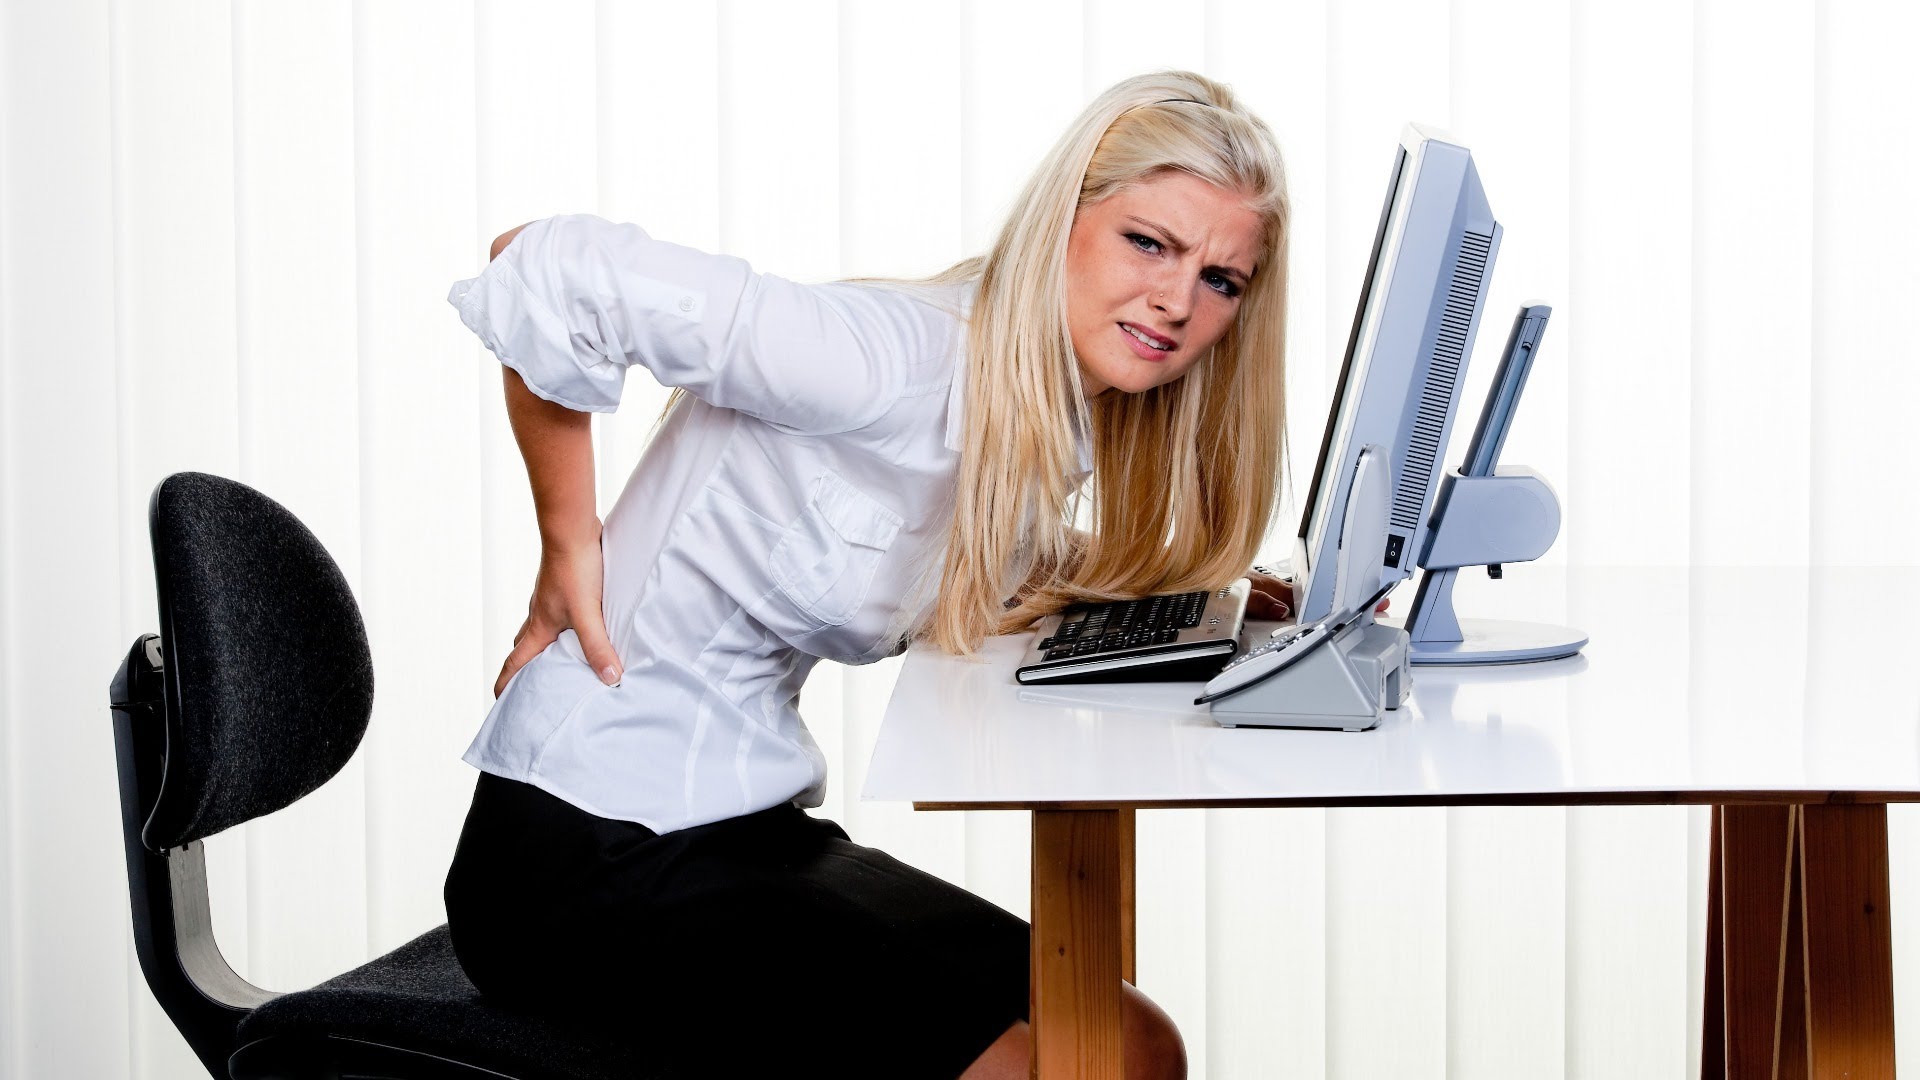 Back pain can be brought on by many different causes, spanning from the purse you carry to your desk at work. (Photo: Shutterstock)